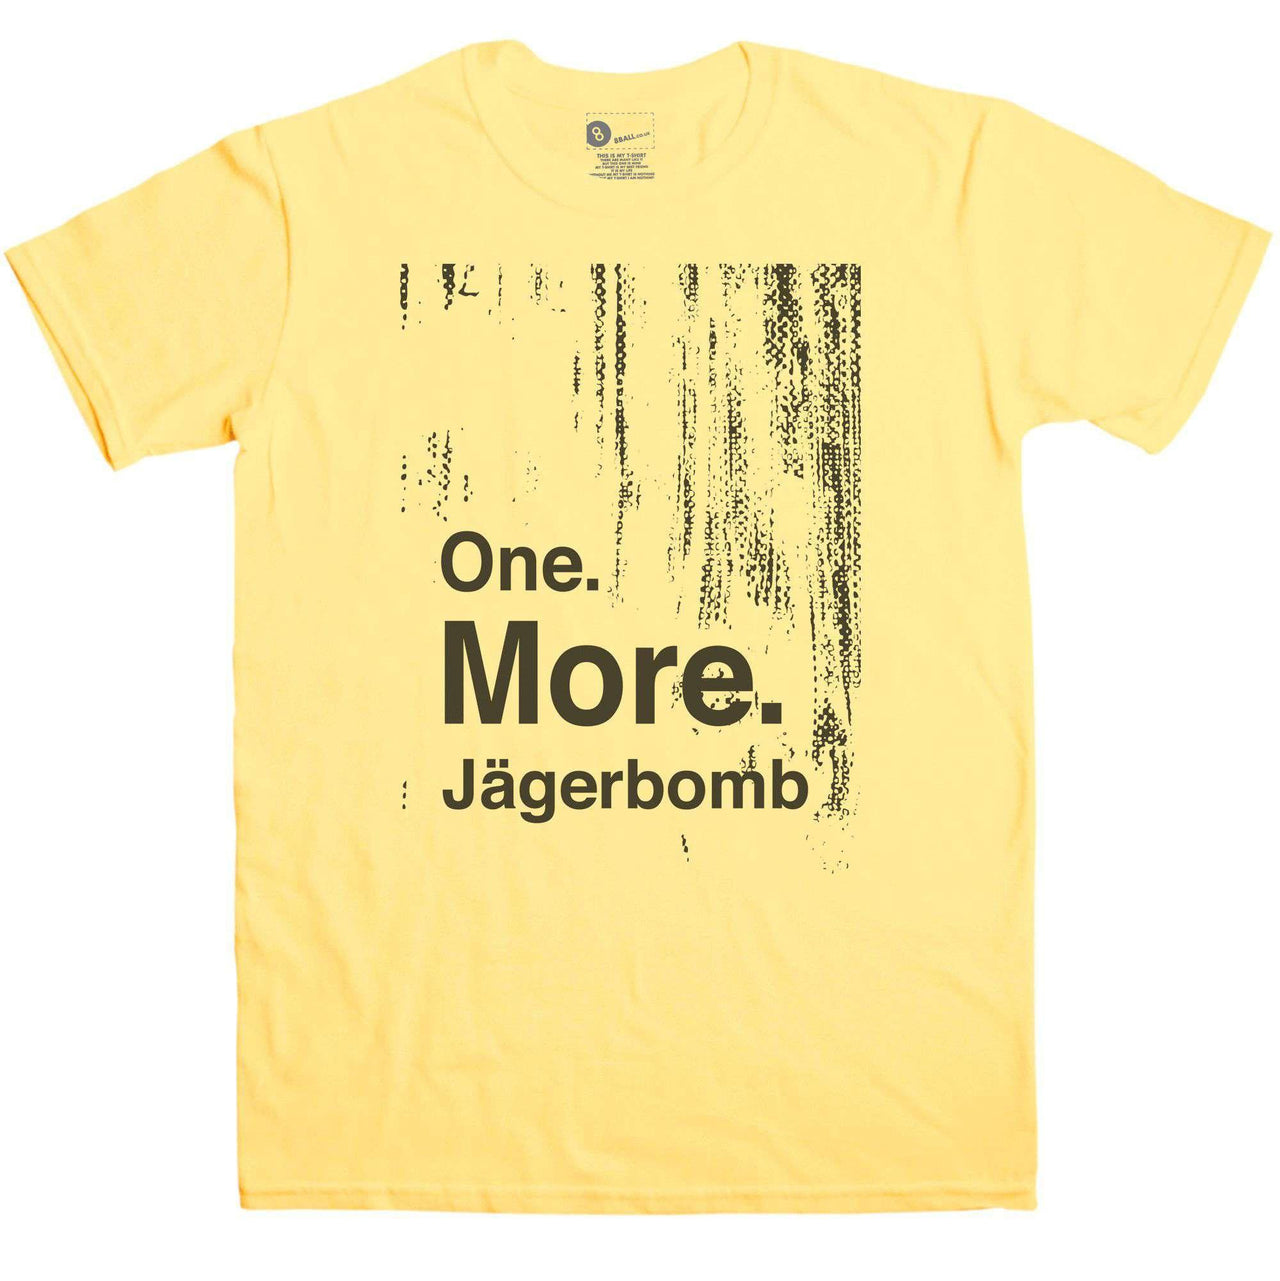 One More Jagerbomb Graphic T-Shirt For Men 8Ball